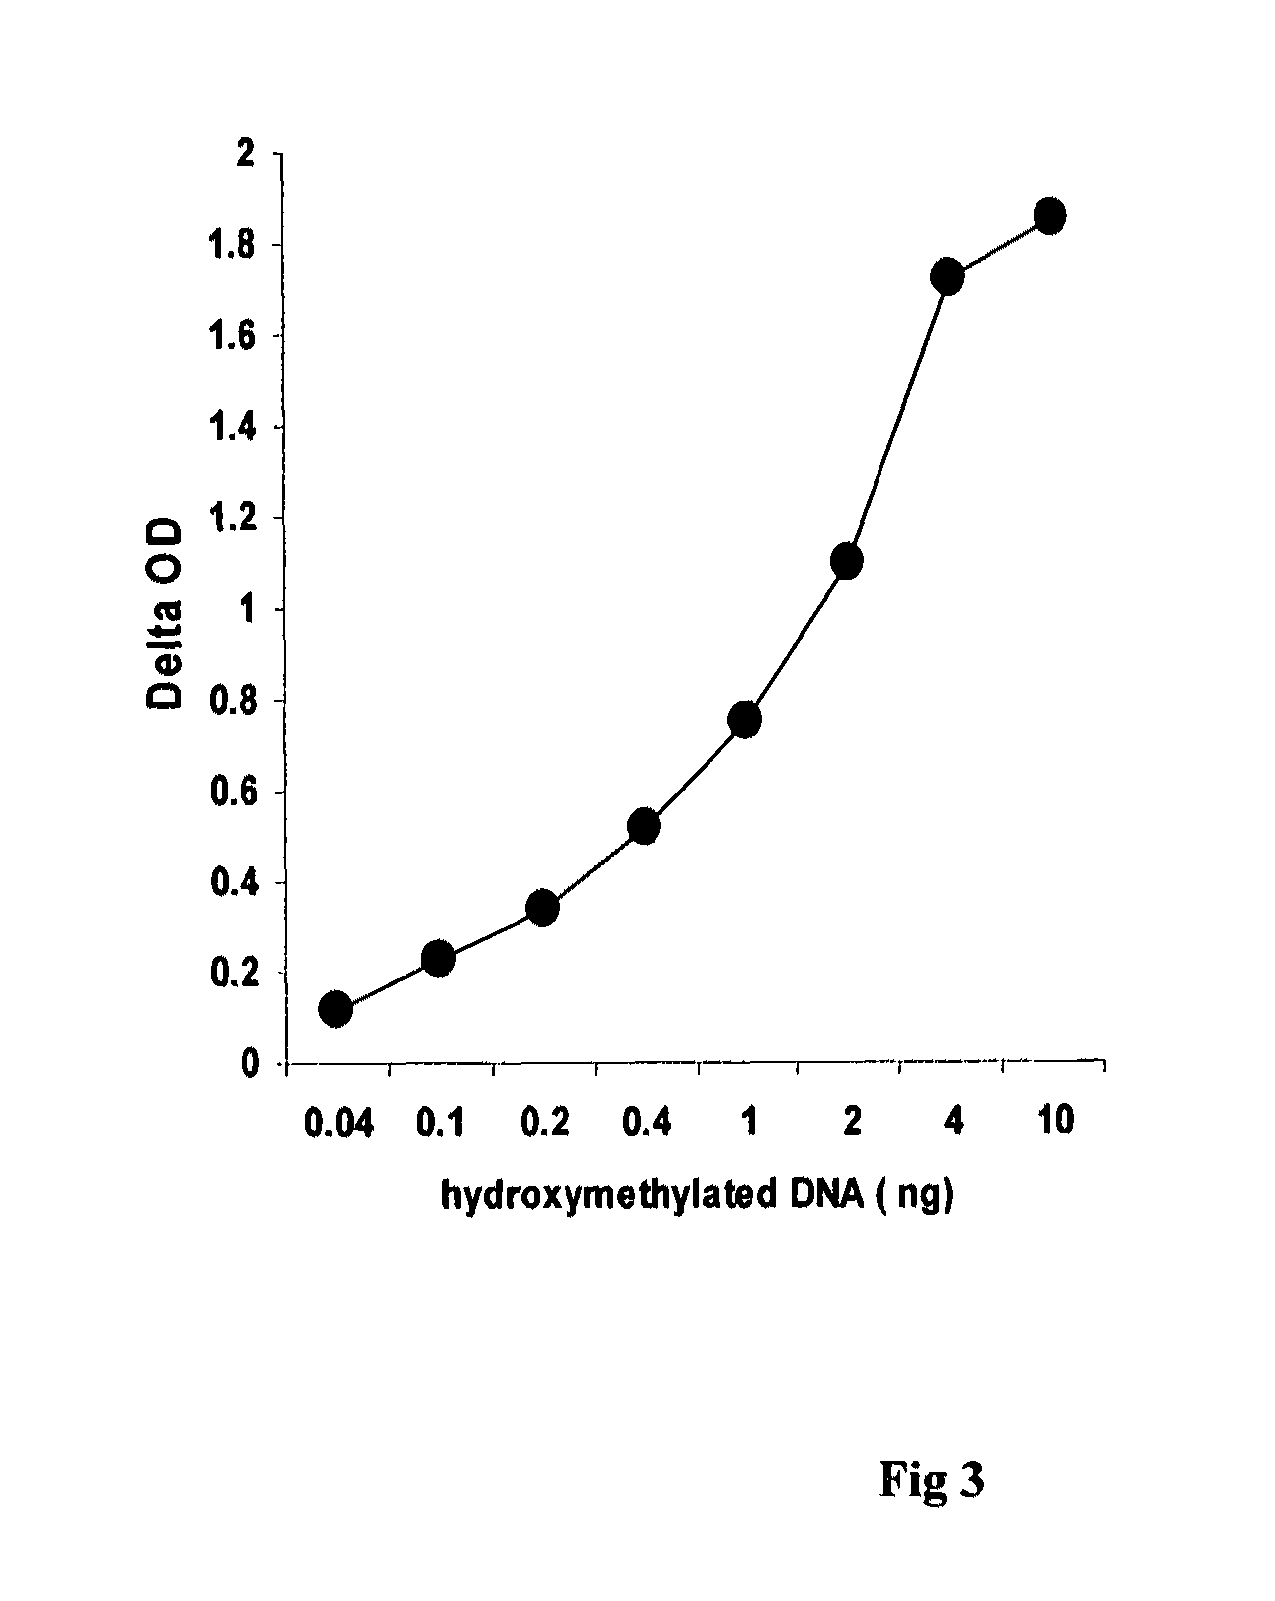 Method of rapidly quantifying hydroxymethylated DNA